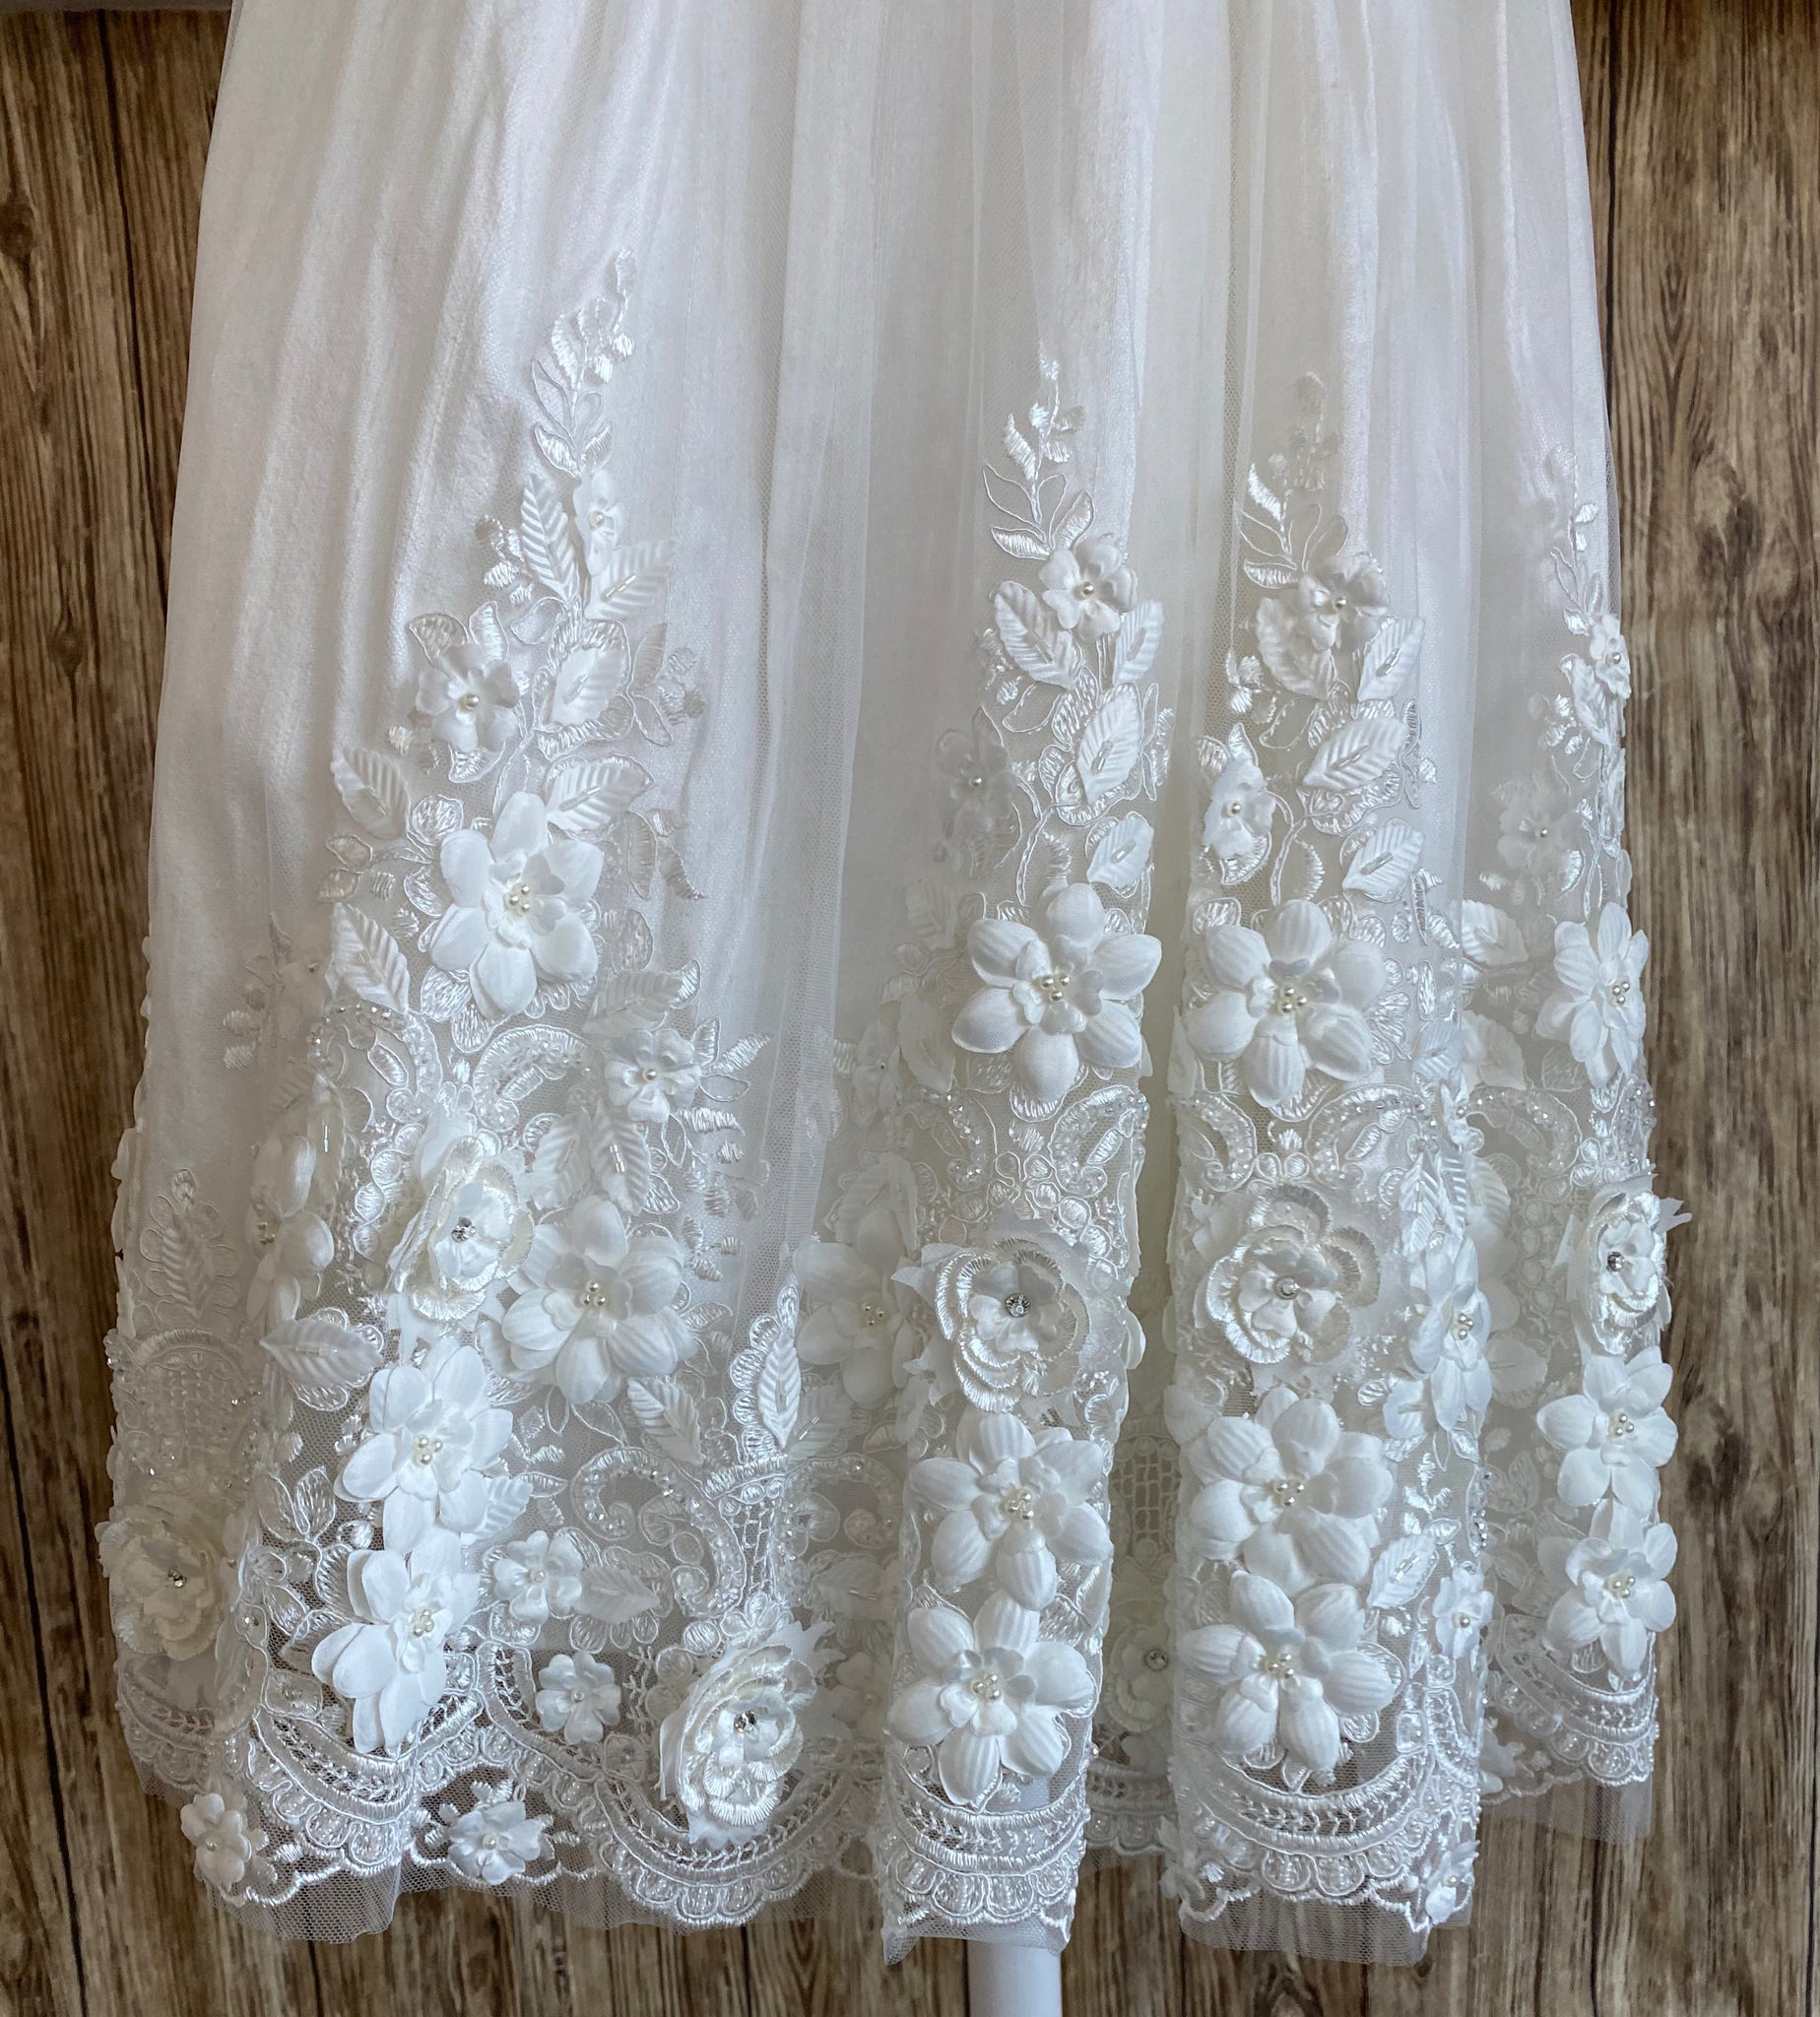 This a beautiful, one-of-a-kind baptism gown.  A lovely gown for a precious child.  Ivory, size 6M  Satin bodice  Satin puffed sleeve Large pearl and rhinestone belt Tulle skirting with embroidered flowers along bottom Rhinestone centers on flowers